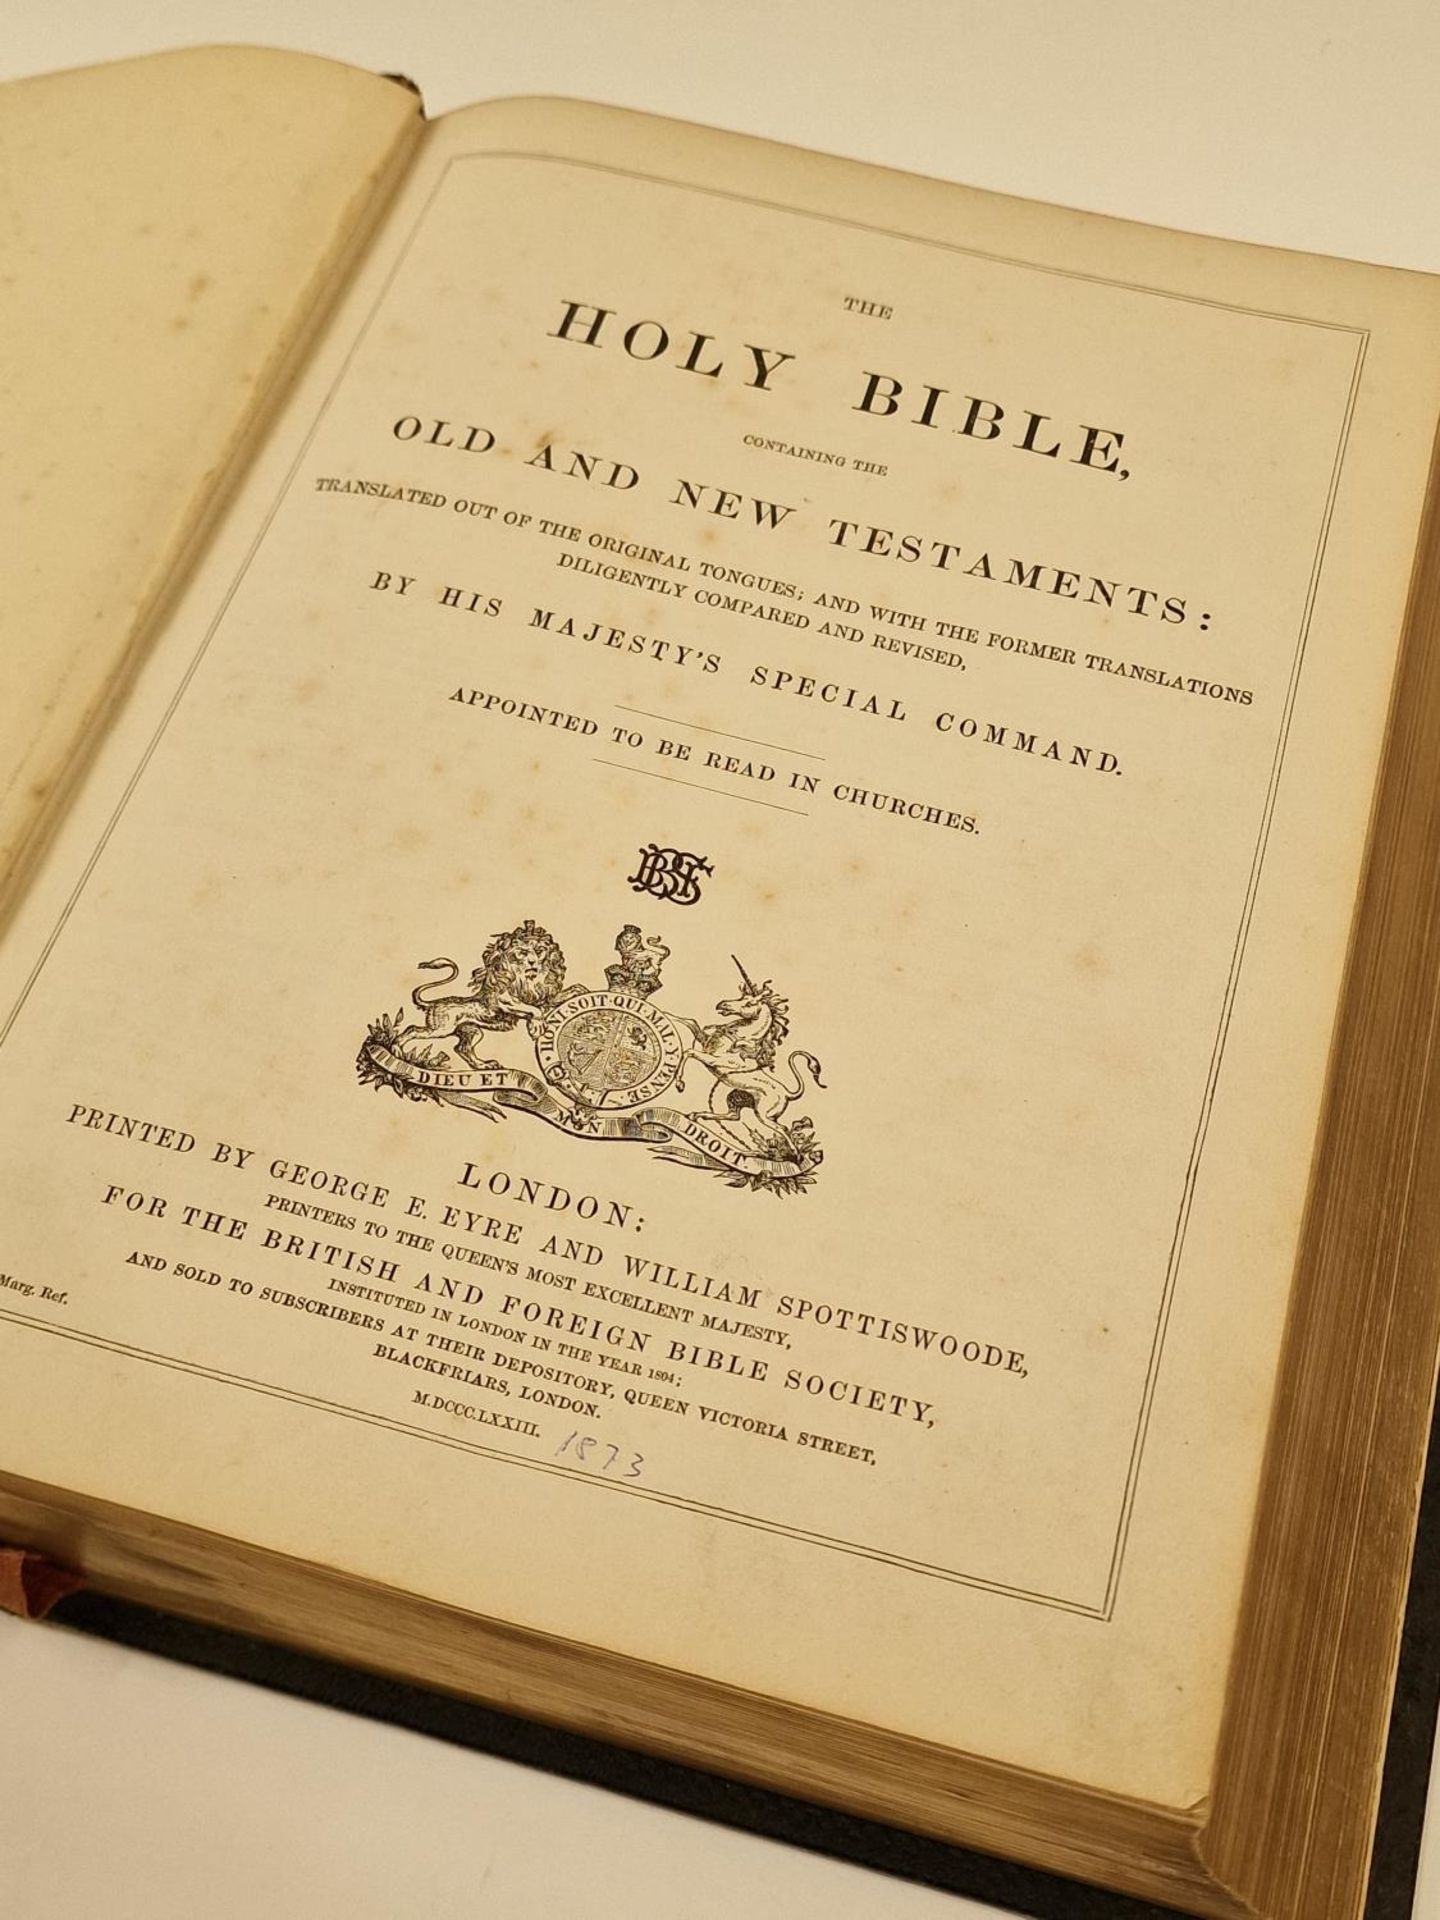 19th century Holy Bible by Eyre and Spottiswoode - Image 3 of 4